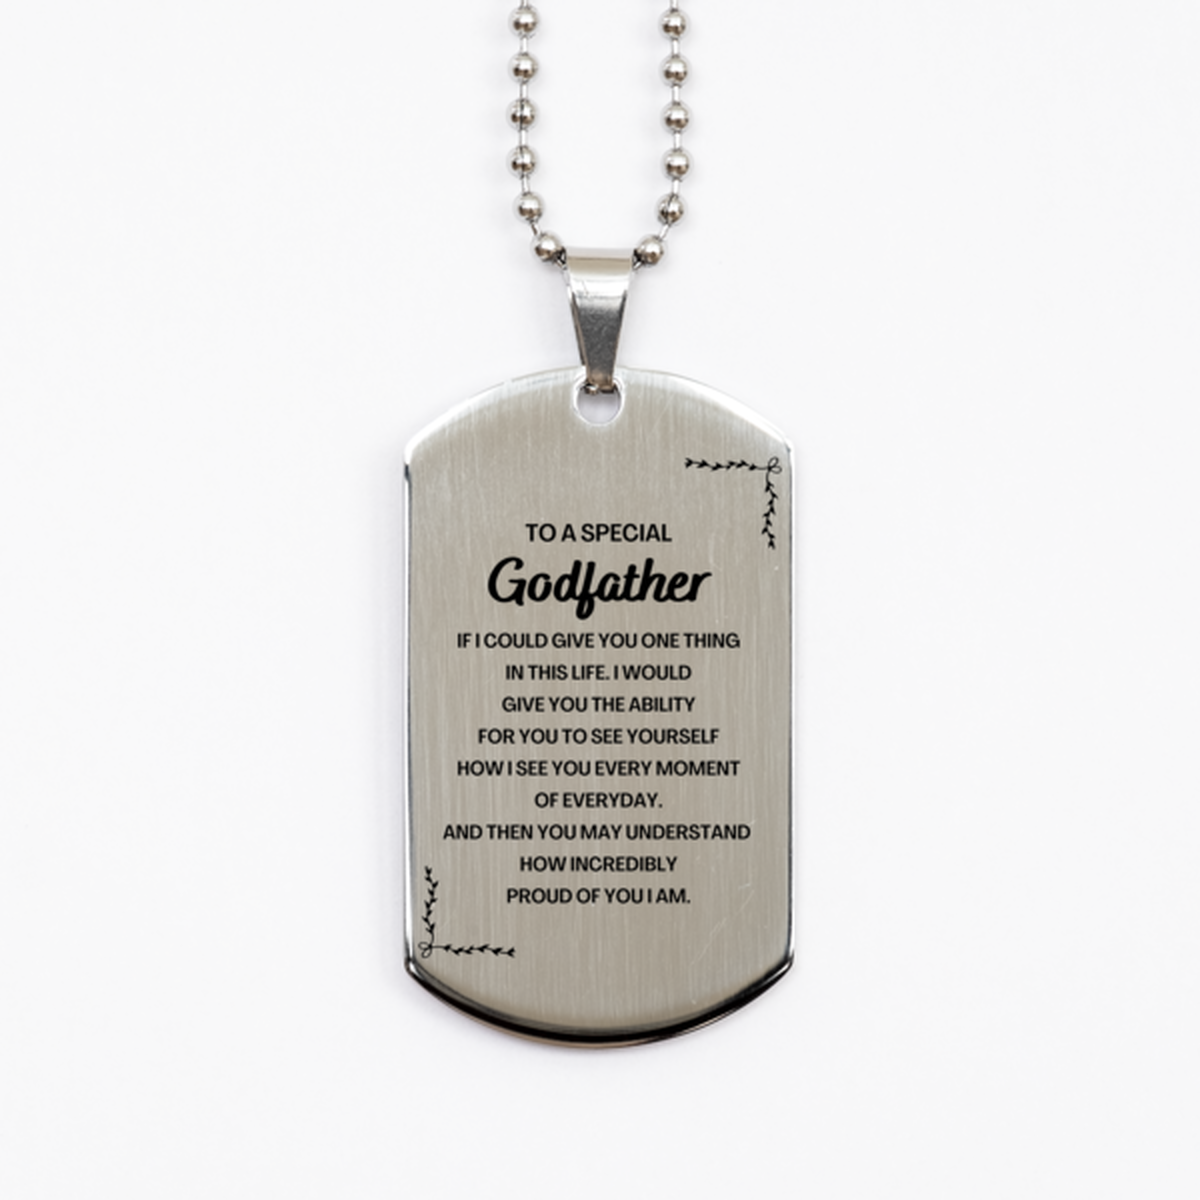 To My Godfather Silver Dog Tag, Gifts For Godfather Engraved, Inspirational Gifts for Christmas Birthday, Epic Gifts for Godfather To A Special Godfather how incredibly proud of you I am